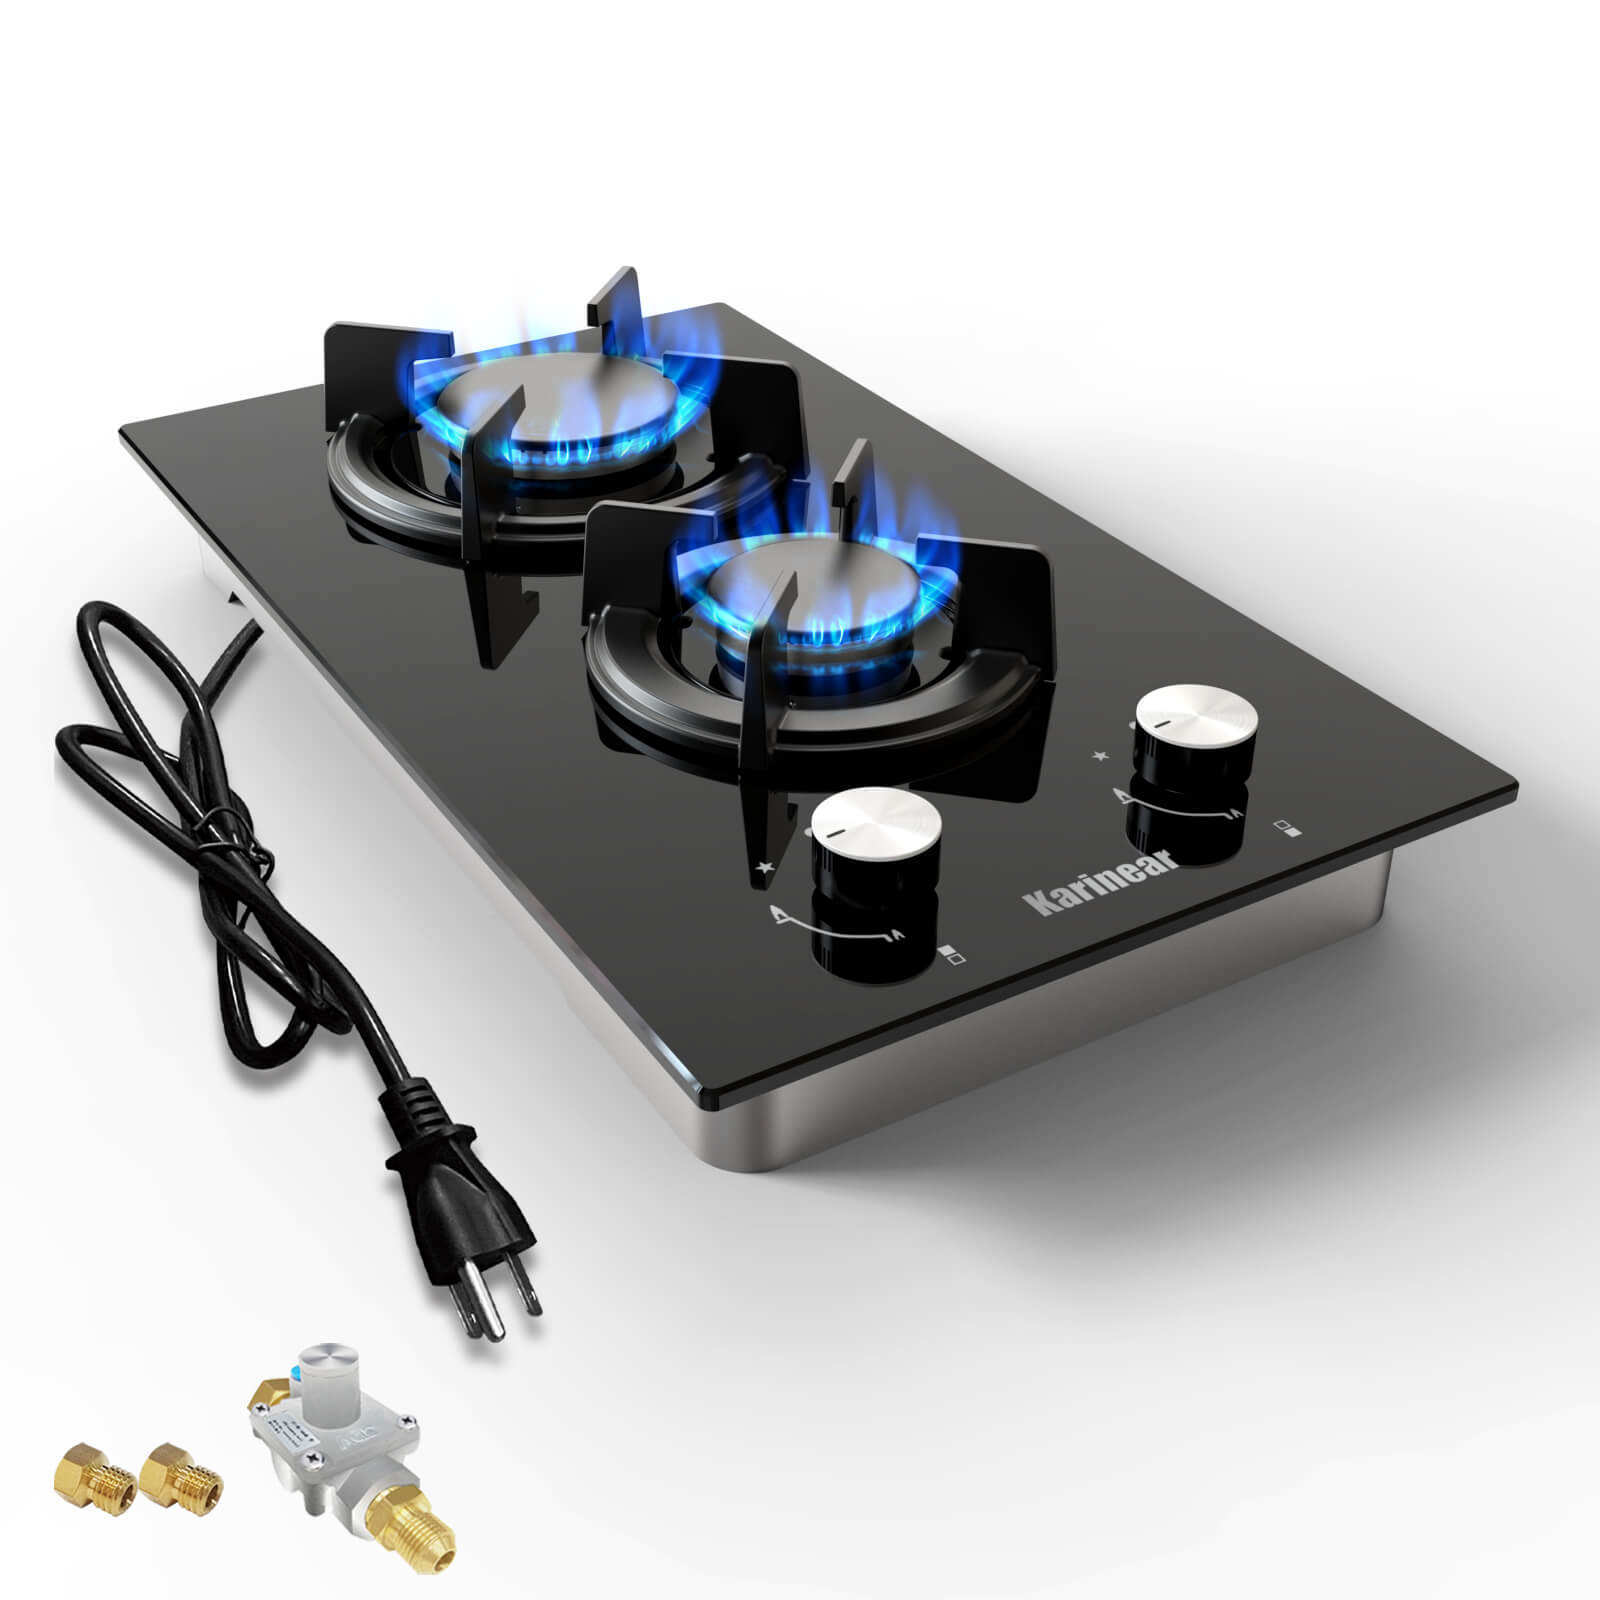 Karinear Tempered Glass 12'' Gas Cooktop 2 Burners, Propane Cooktop, Built-in Gas Stovetop 